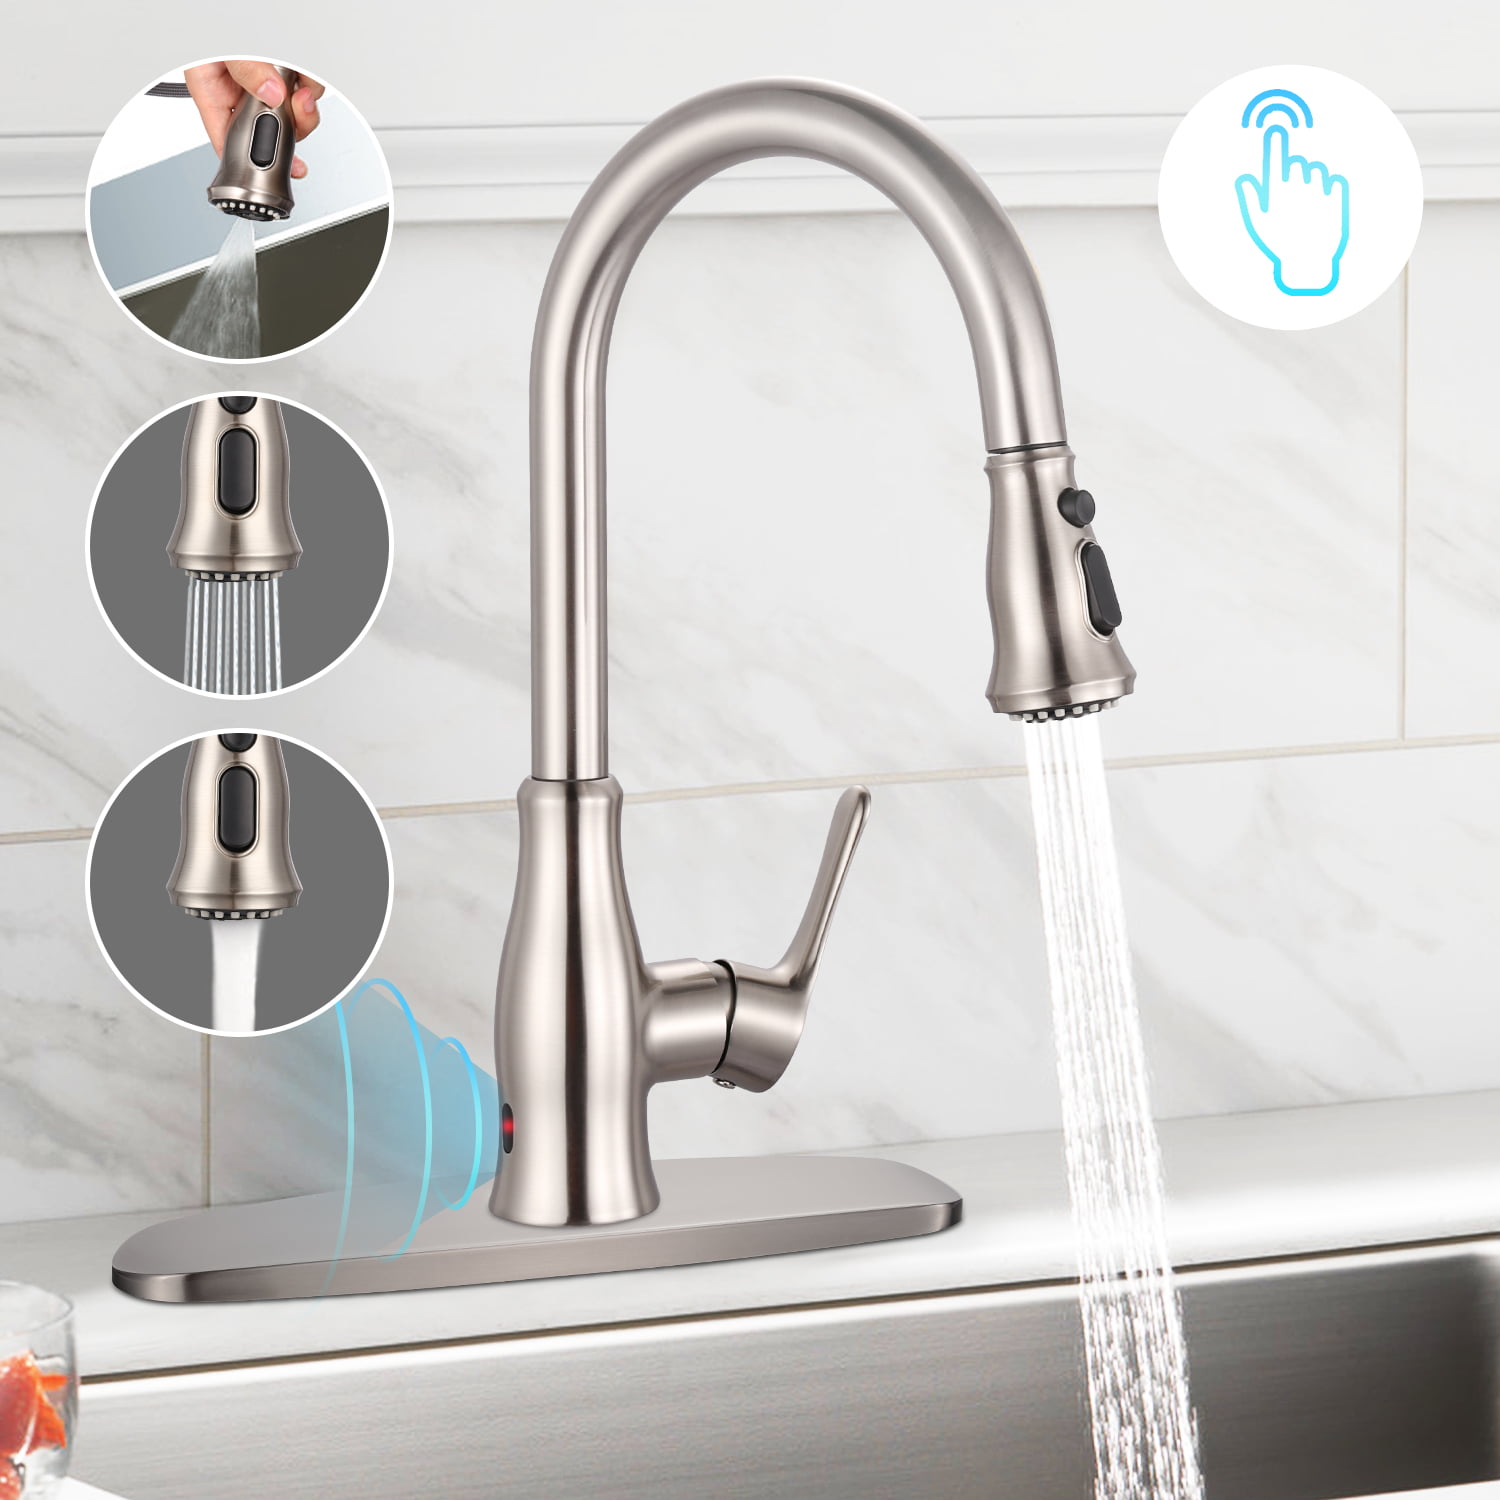 Luxury Solid Stainless Steel Pull Down Kitchen Sink Faucet Double Function Head 